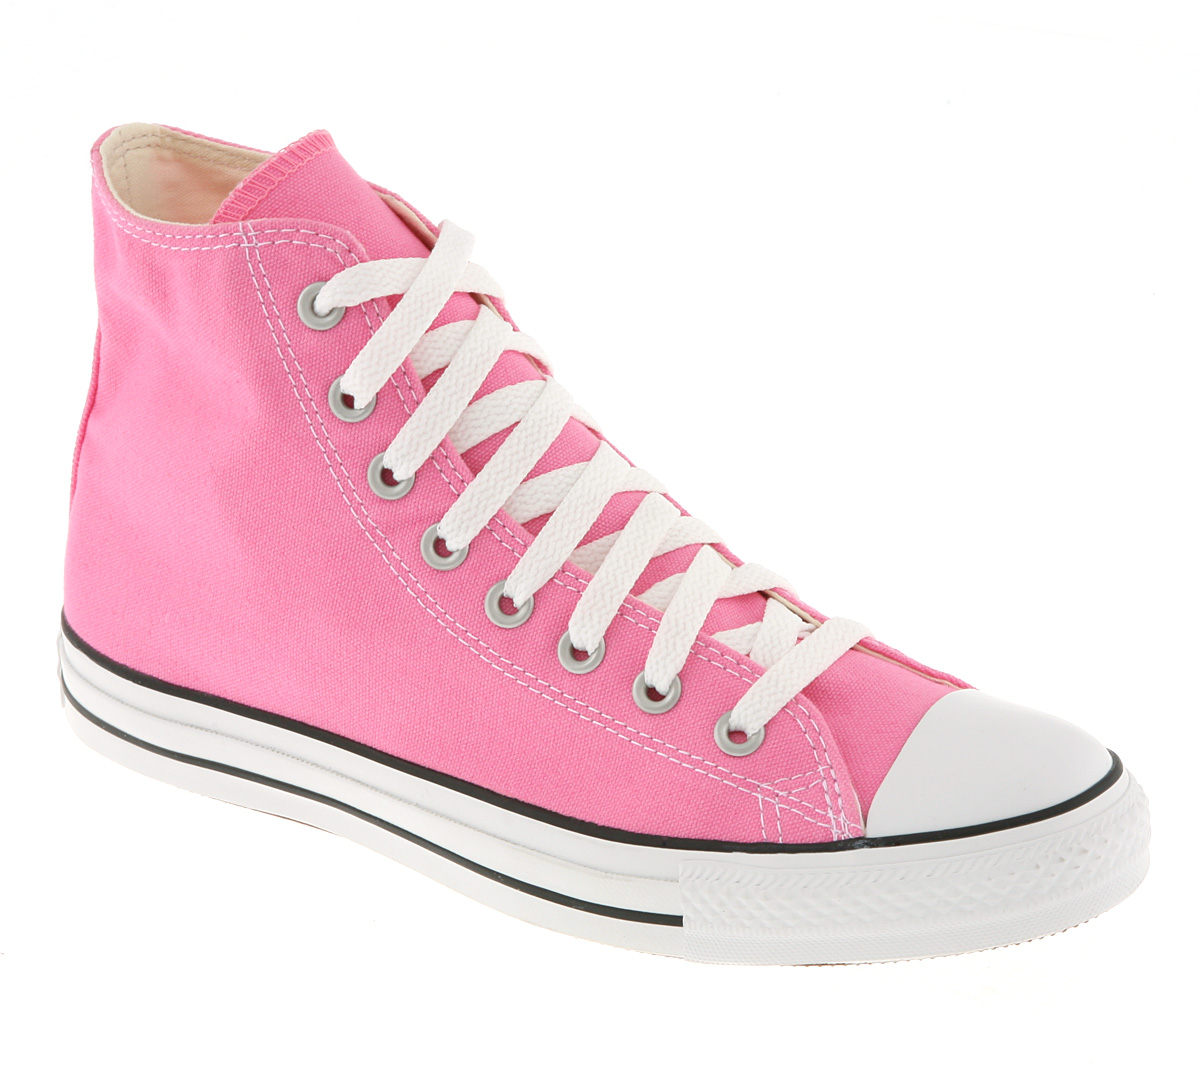 Converse All Star Hi in Pink for Men - Lyst